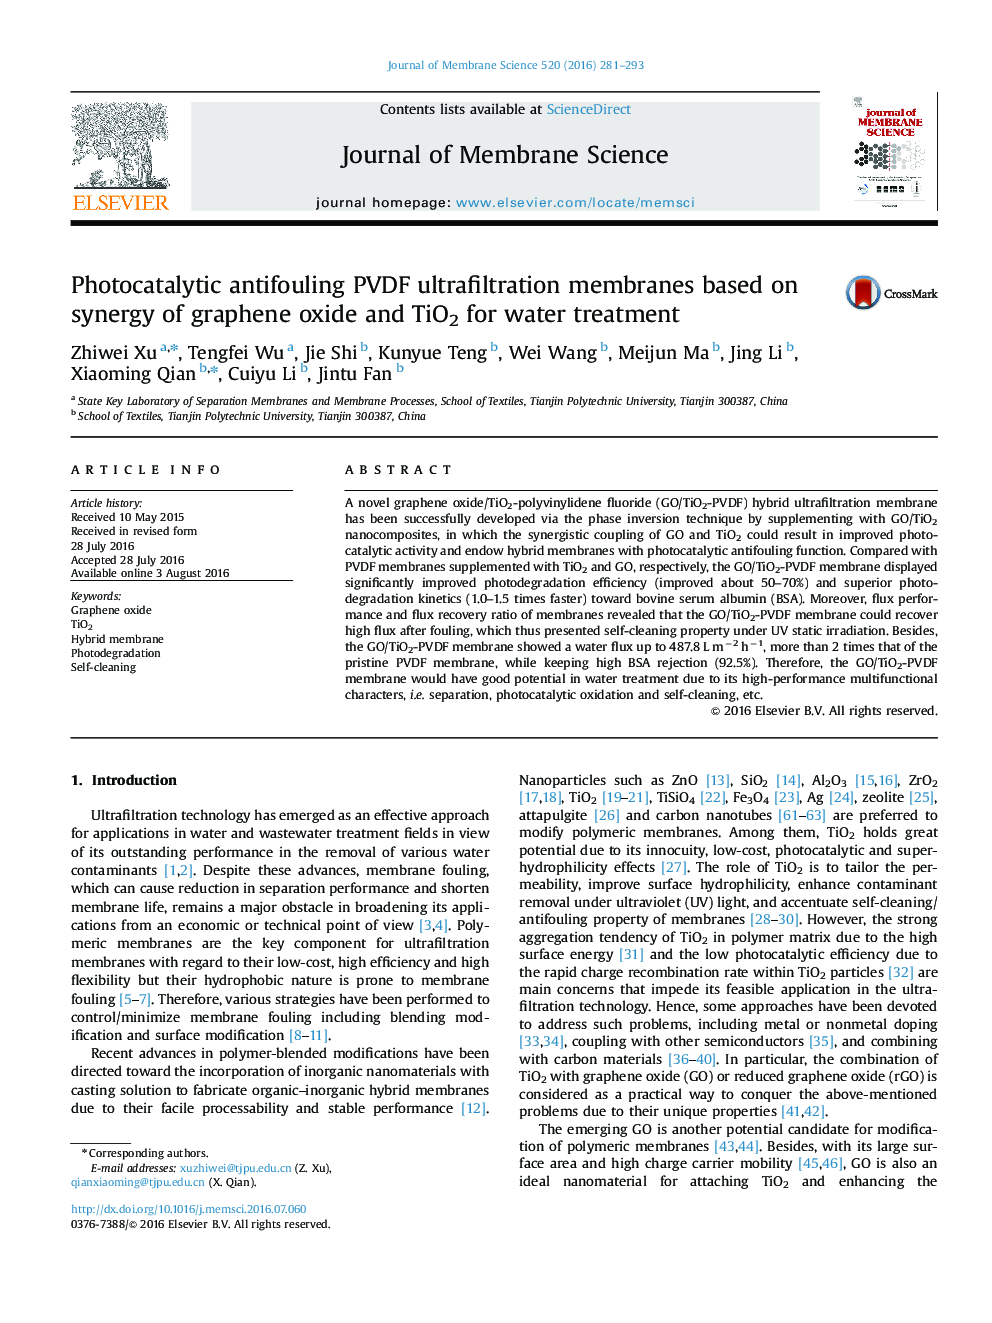 Photocatalytic antifouling PVDF ultrafiltration membranes based on synergy of graphene oxide and TiO2 for water treatment